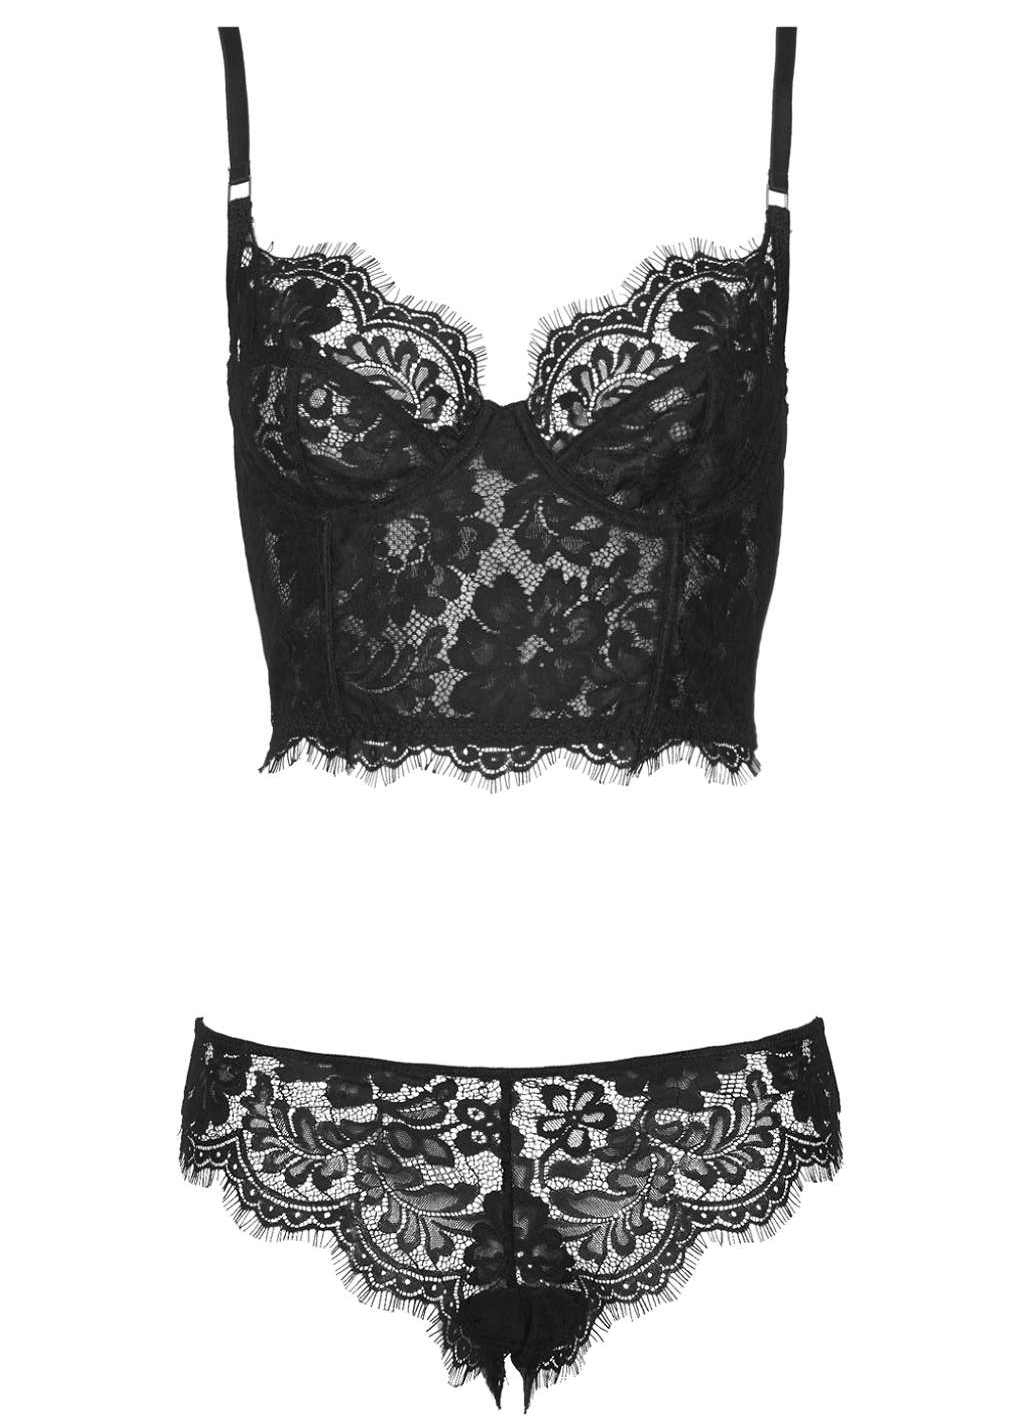 valentines day lingerie to buy